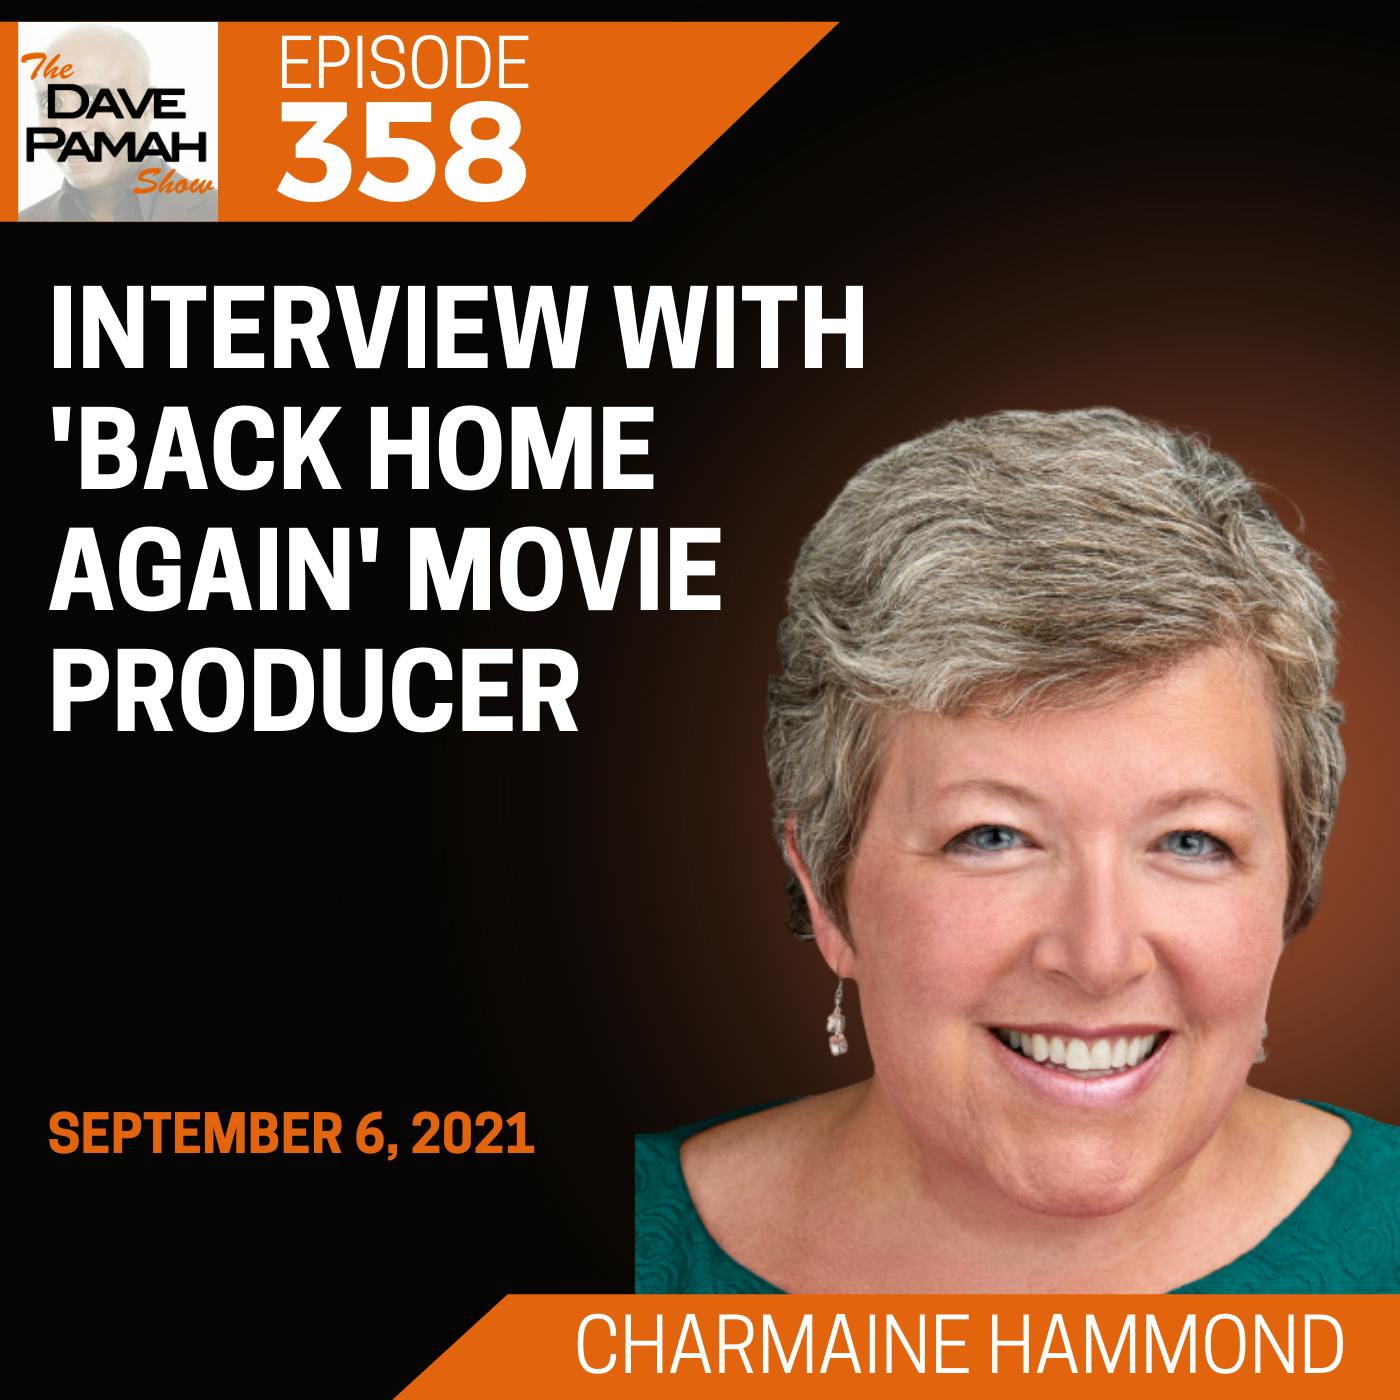 Interview with 'Back Home Again' movie producer Charmaine Hammond